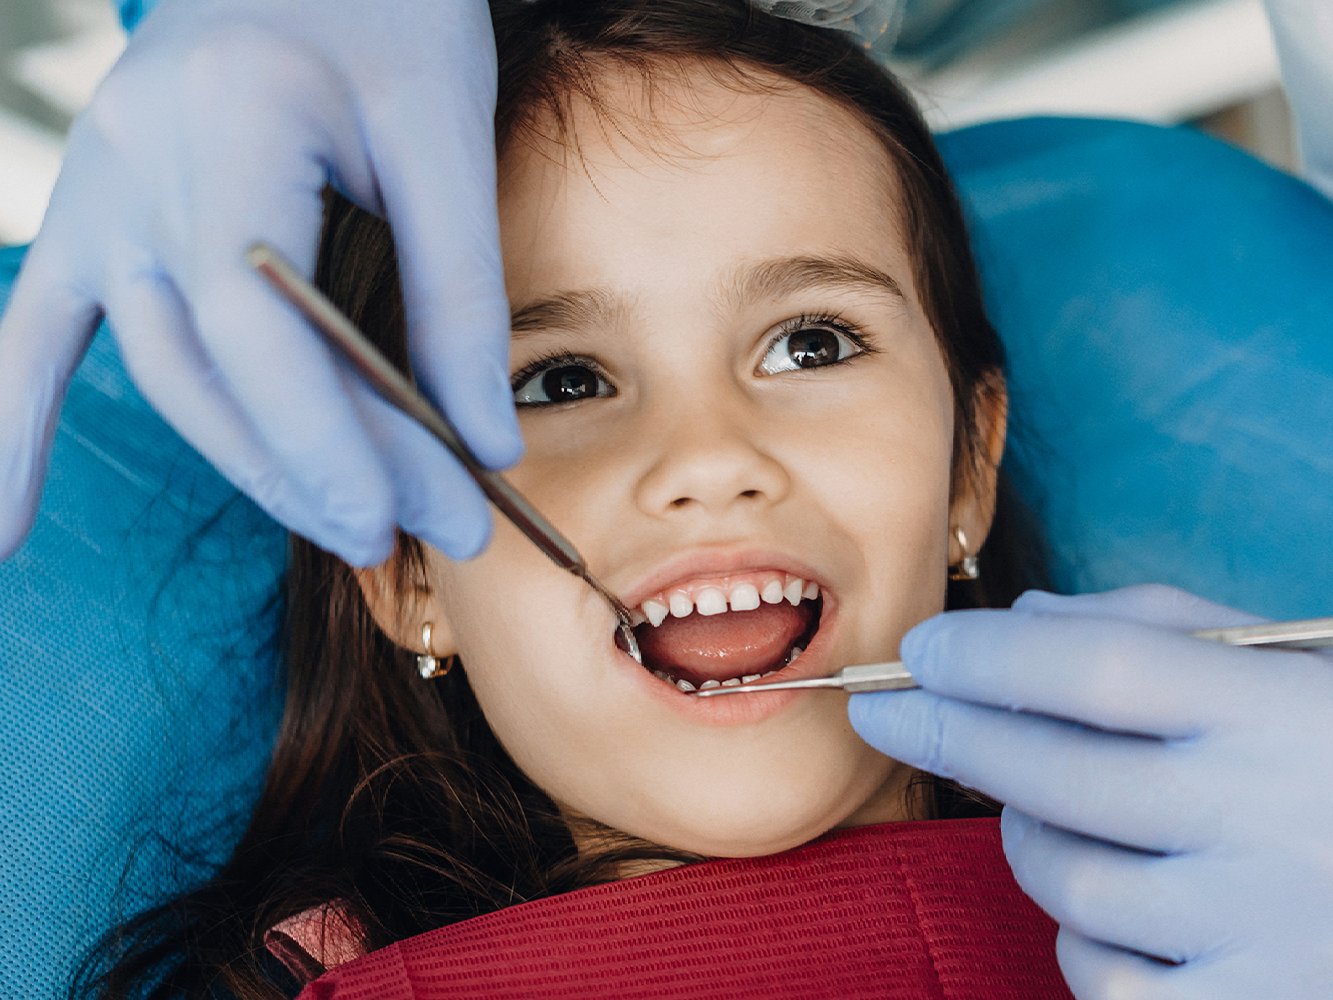 young child smiling while getting teeth examined